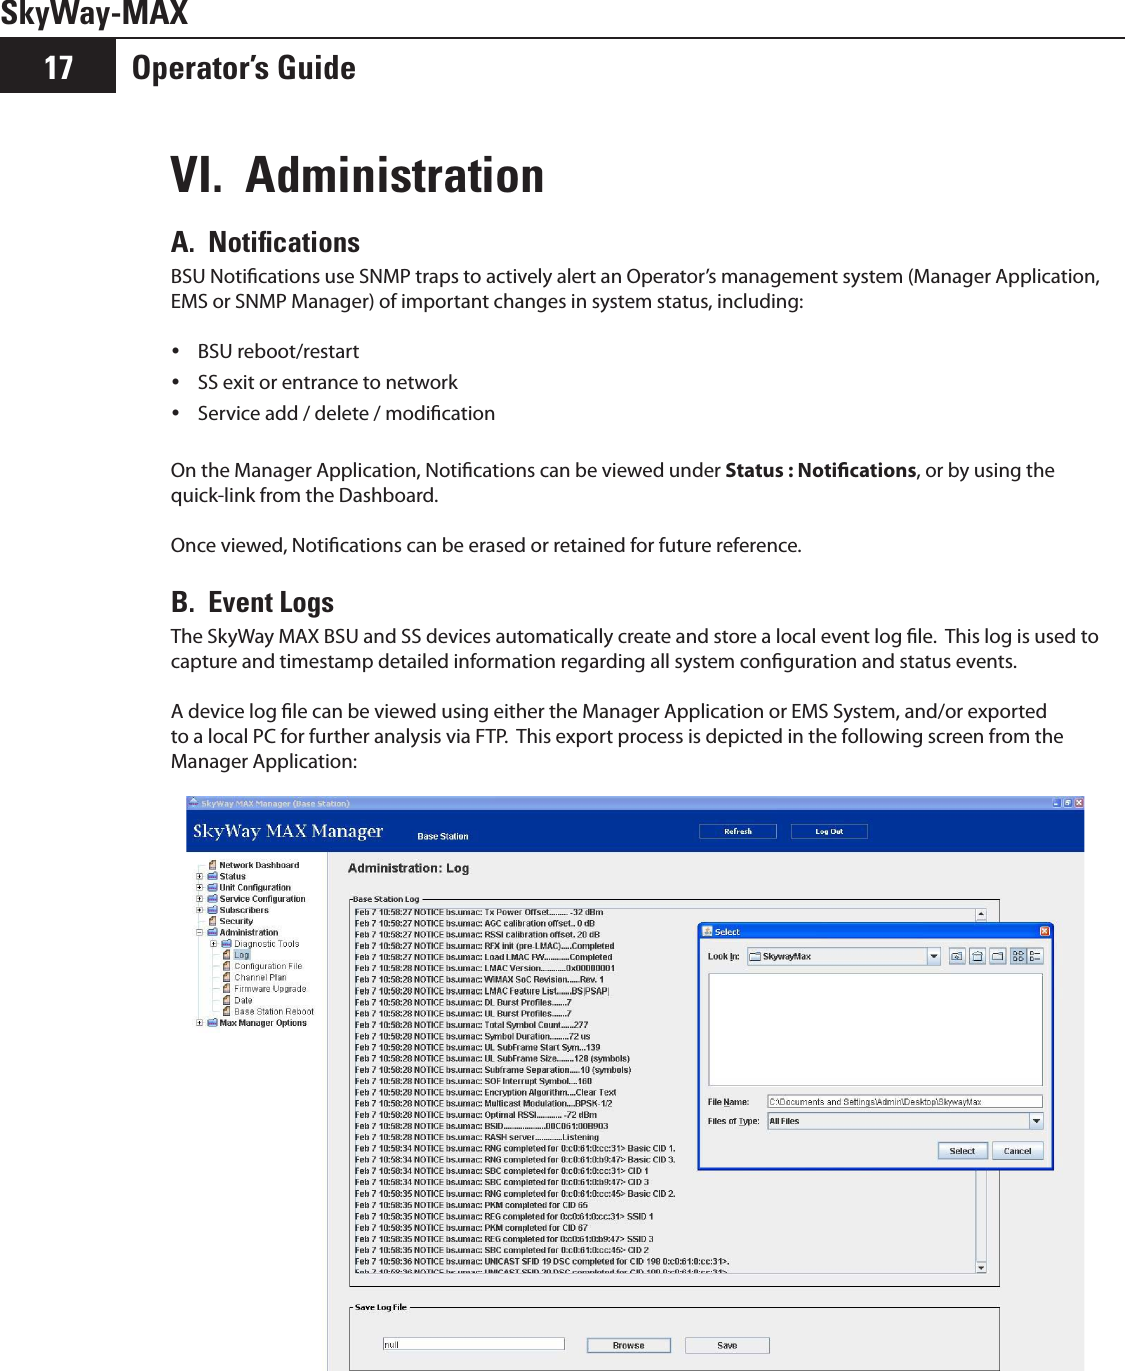 SkyWay-MAXOperator’s Guide17VI.  Administration A.  NotiﬁcationsBSU Notications use SNMP traps to actively alert an Operator’s management system (Manager Application, EMS or SNMP Manager) of important changes in system status, including:BSU reboot/restart ySS exit or entrance to network yService add / delete / modication yOn the Manager Application, Notications can be viewed under Status : Notications, or by using the quick-link from the Dashboard.Once viewed, Notications can be erased or retained for future reference.B.  Event LogsThe SkyWay MAX BSU and SS devices automatically create and store a local event log le.  This log is used to capture and timestamp detailed information regarding all system conguration and status events.  A device log le can be viewed using either the Manager Application or EMS System, and/or exported to a local PC for further analysis via FTP.  This export process is depicted in the following screen from the Manager Application: